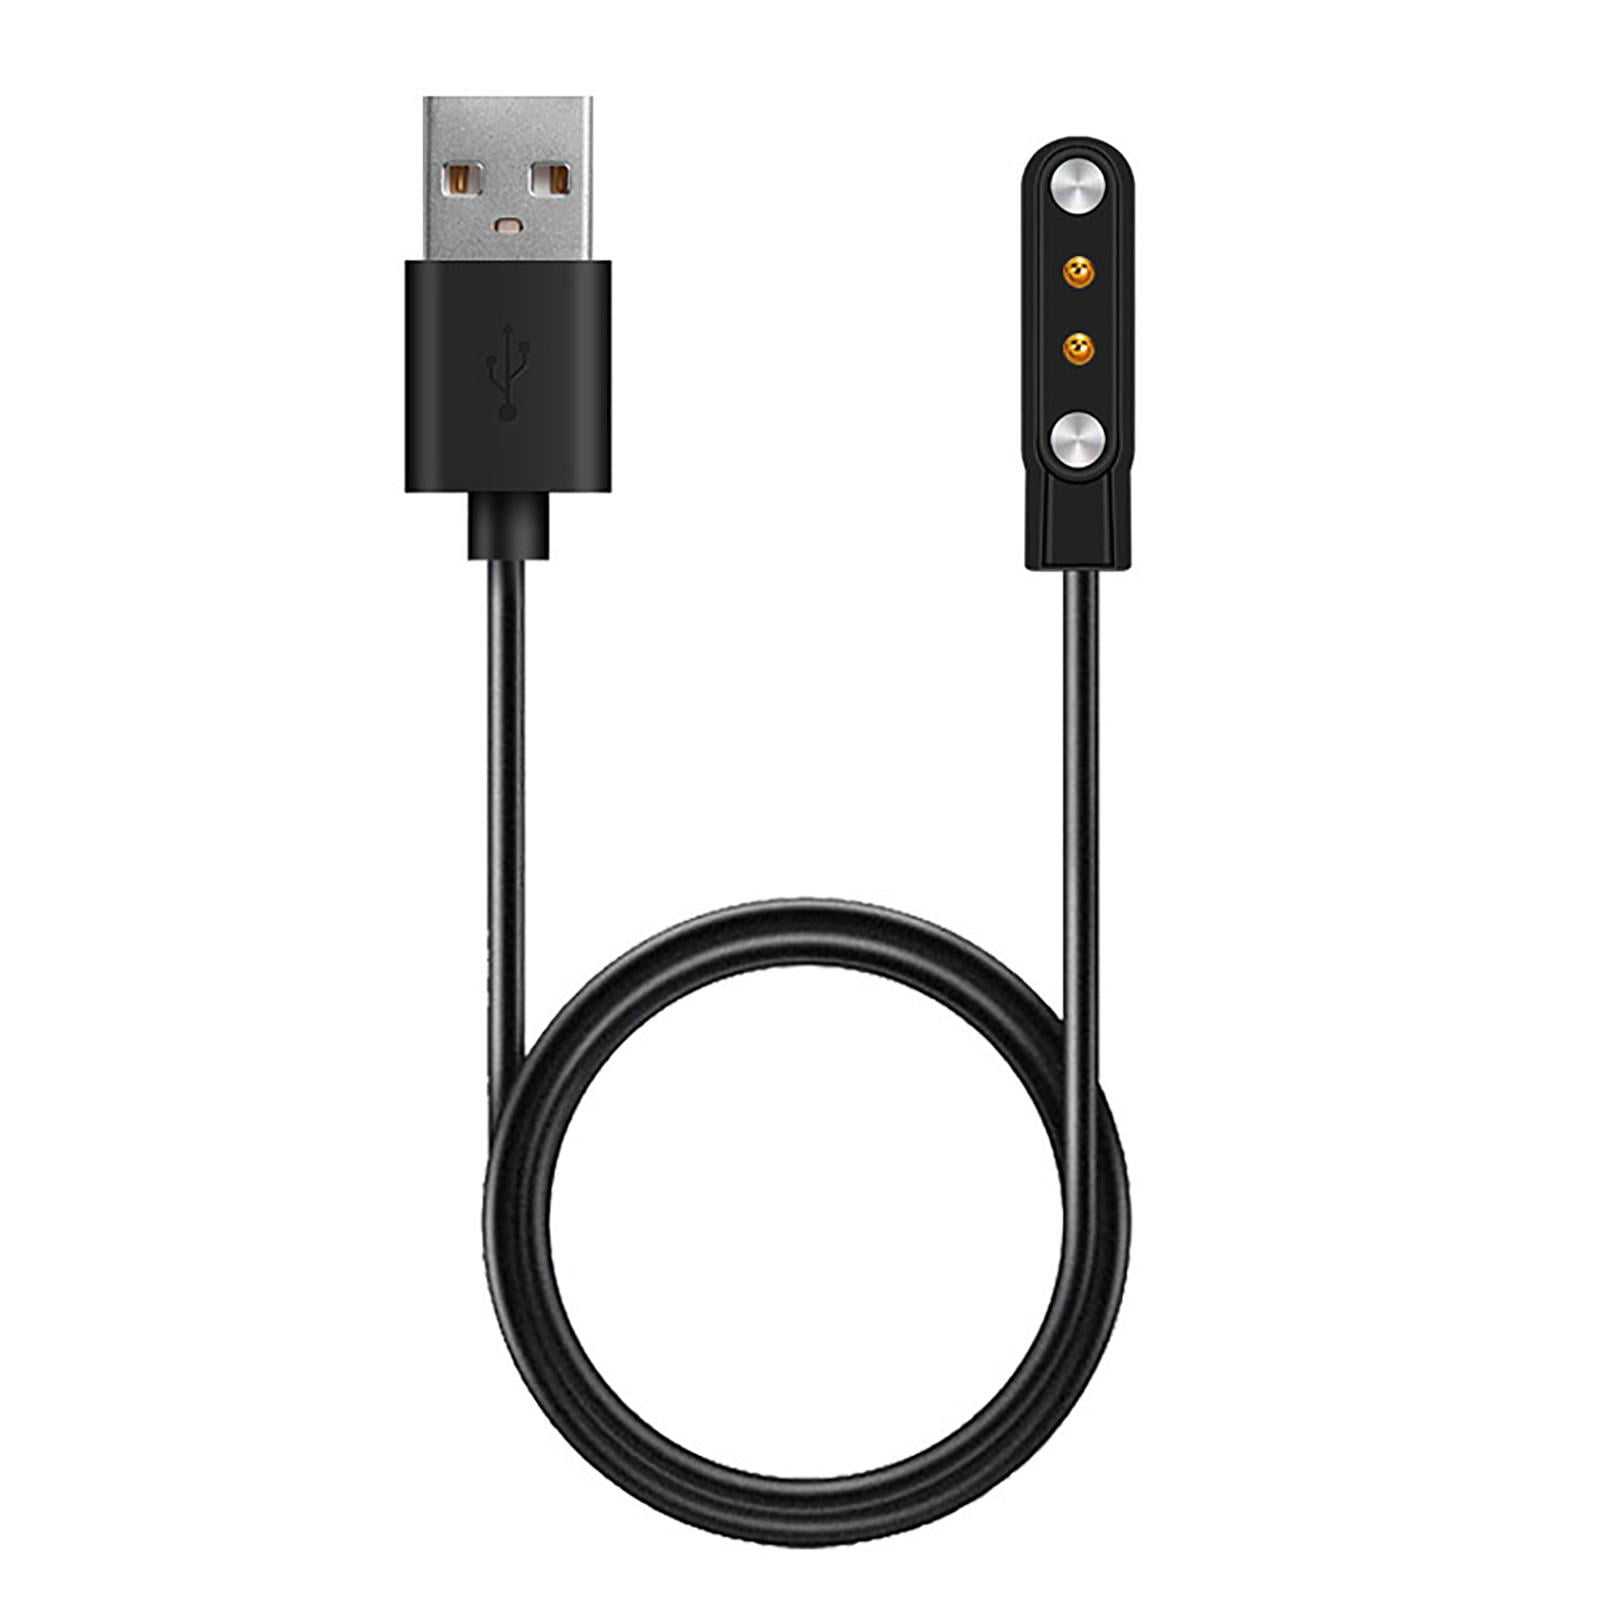 FB171RCC Fitbit Versa 2 Charging Cable for sale online 